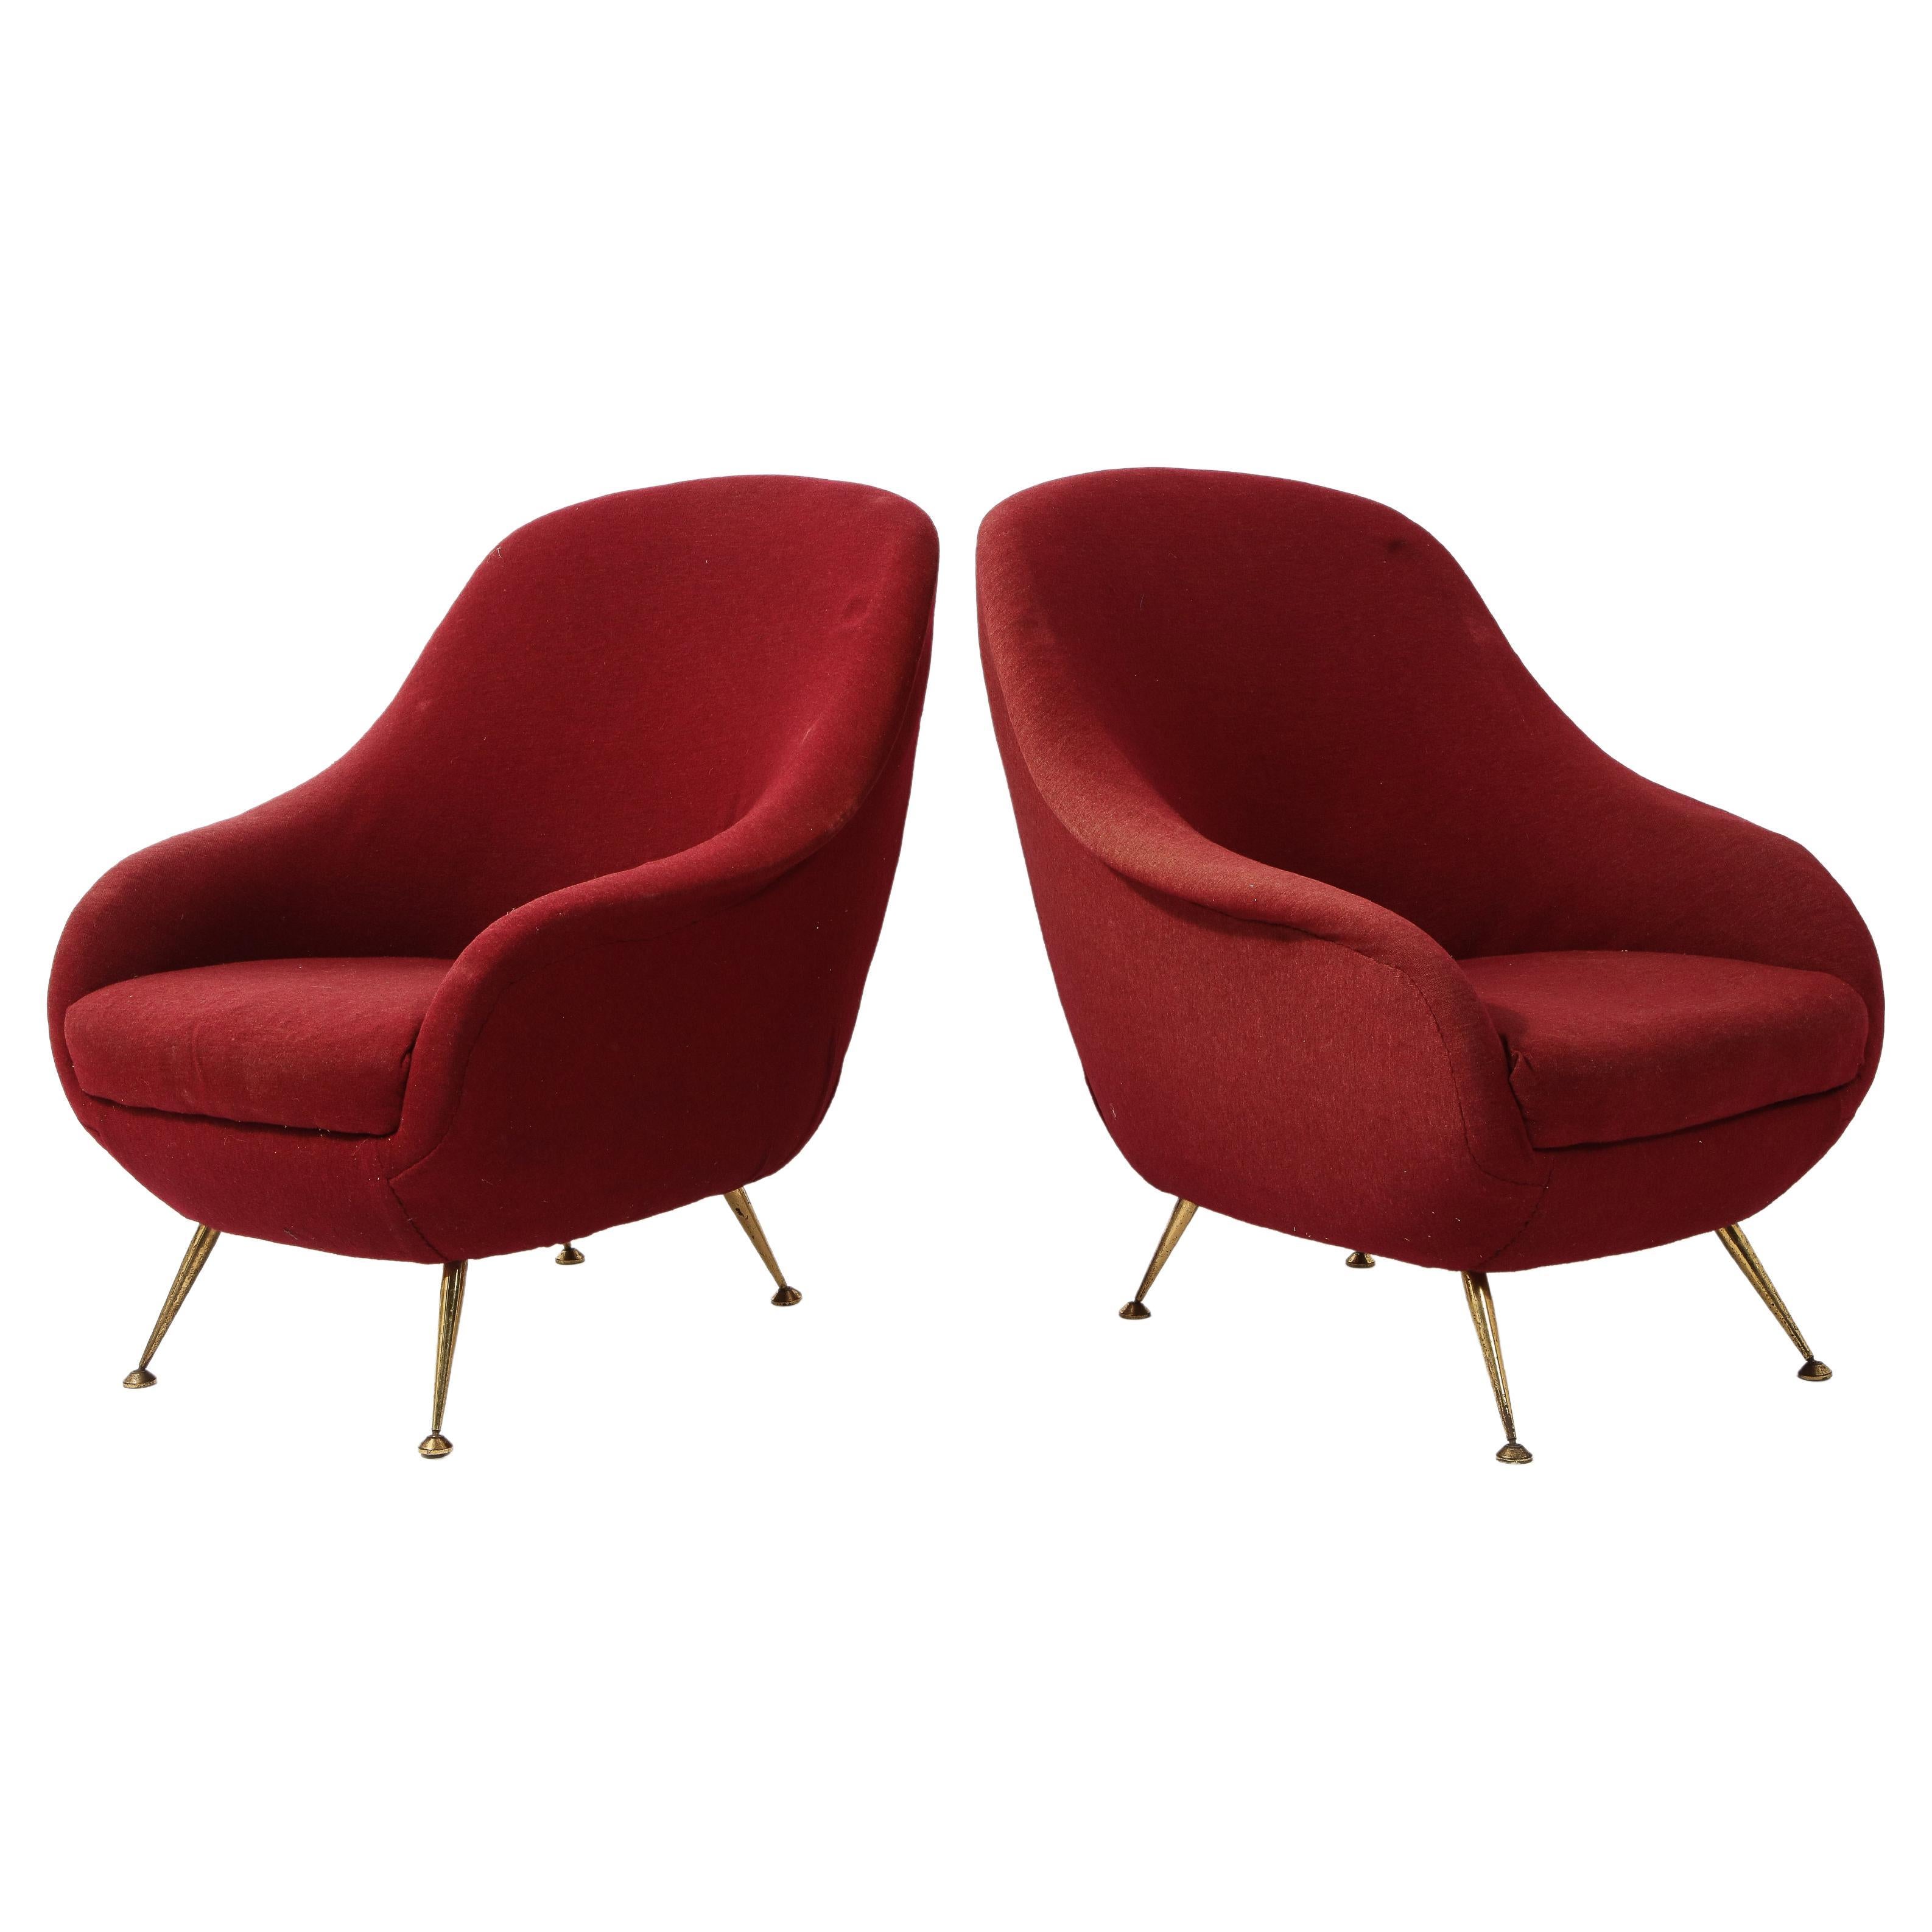 Pair of Burgundy "Egg" Lounge Chairs, Italy 1950's For Sale